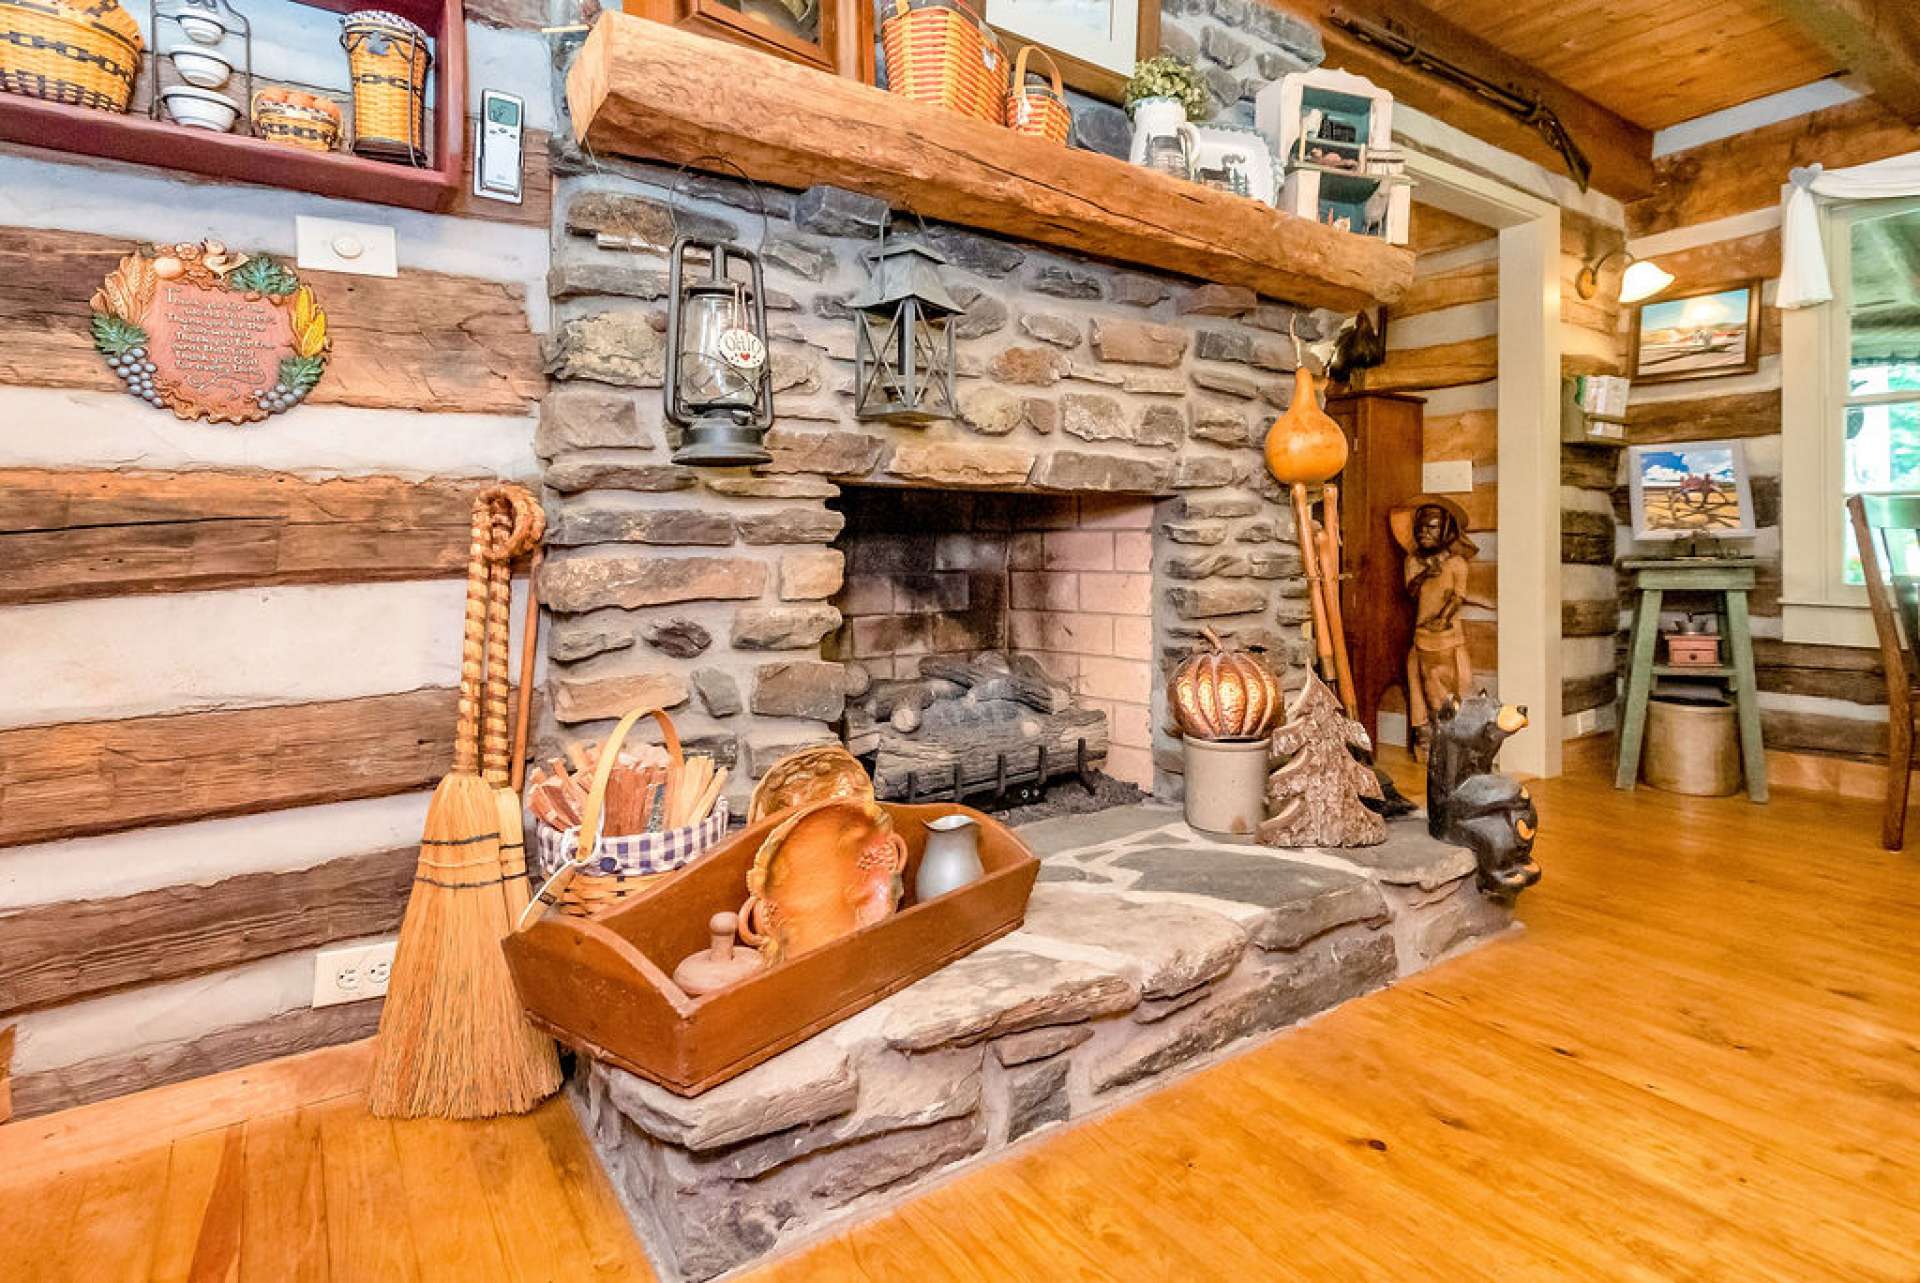 Your visitors will love sitting by the fire hearing the story of how you found this fabulous cabin.